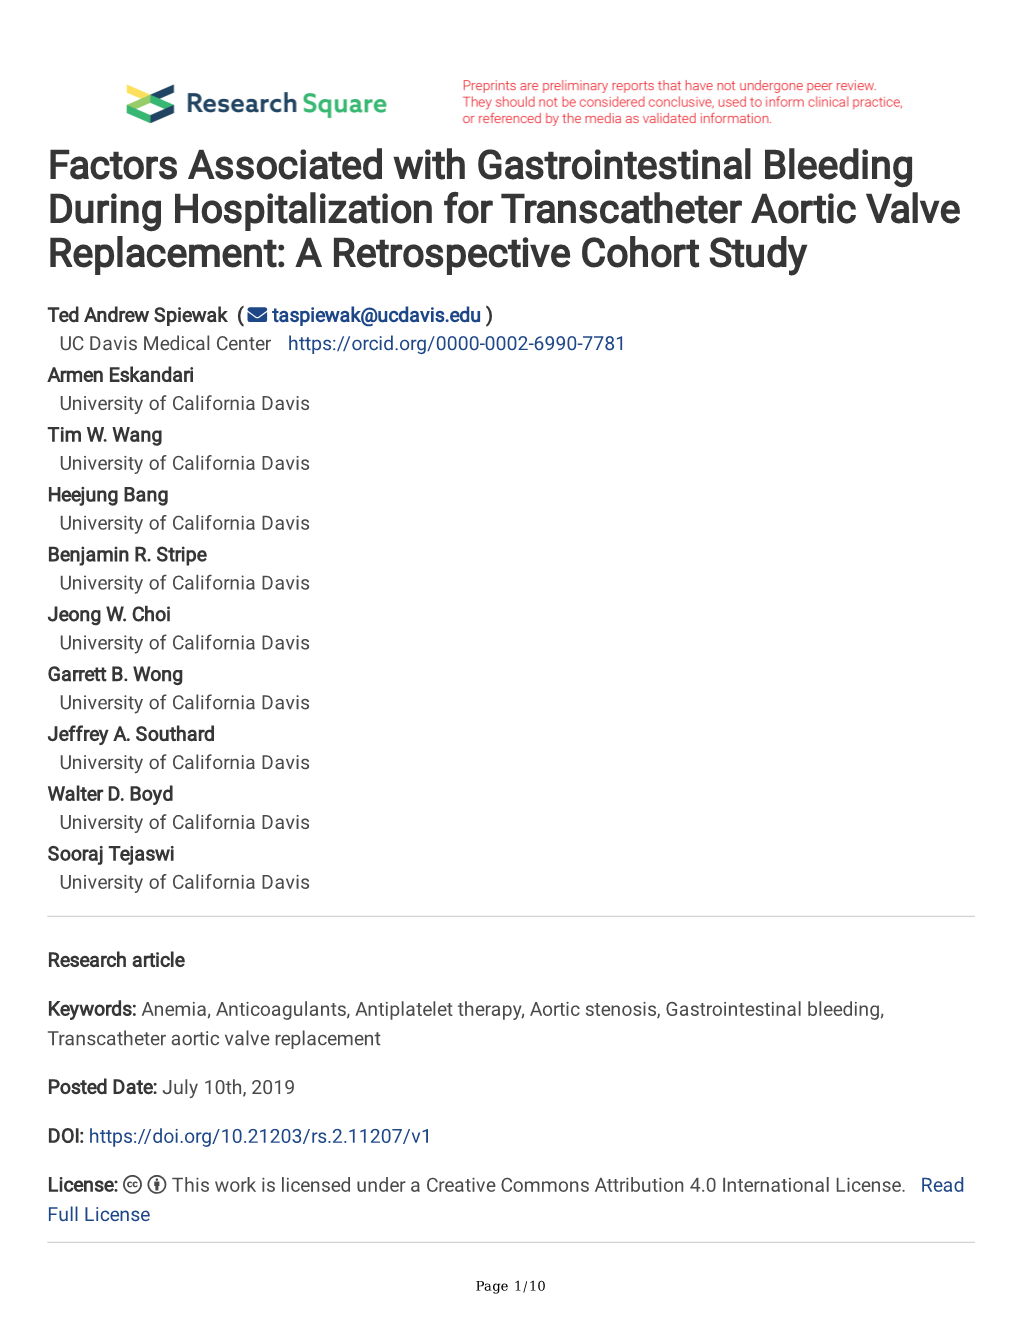 Factors Associated with Gastrointestinal Bleeding During Hospitalization for Transcatheter Aortic Valve Replacement: a Retrospective Cohort Study